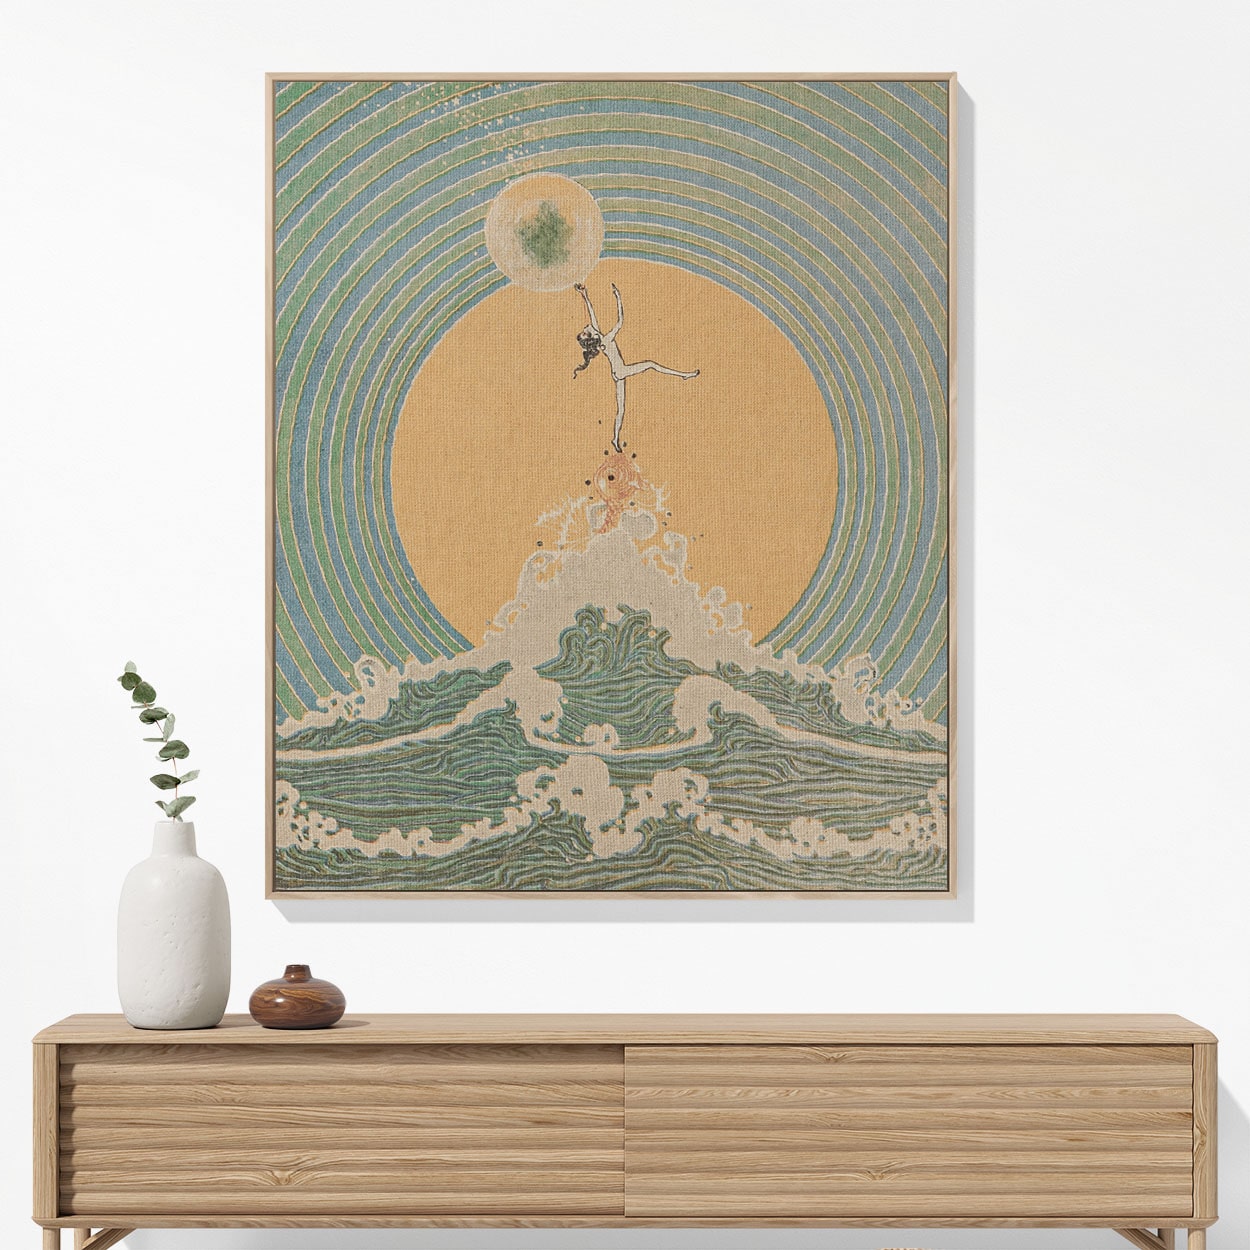 Reach for the Moon Woven Blanket Woven Blanket Hanging on a Wall as Framed Wall Art